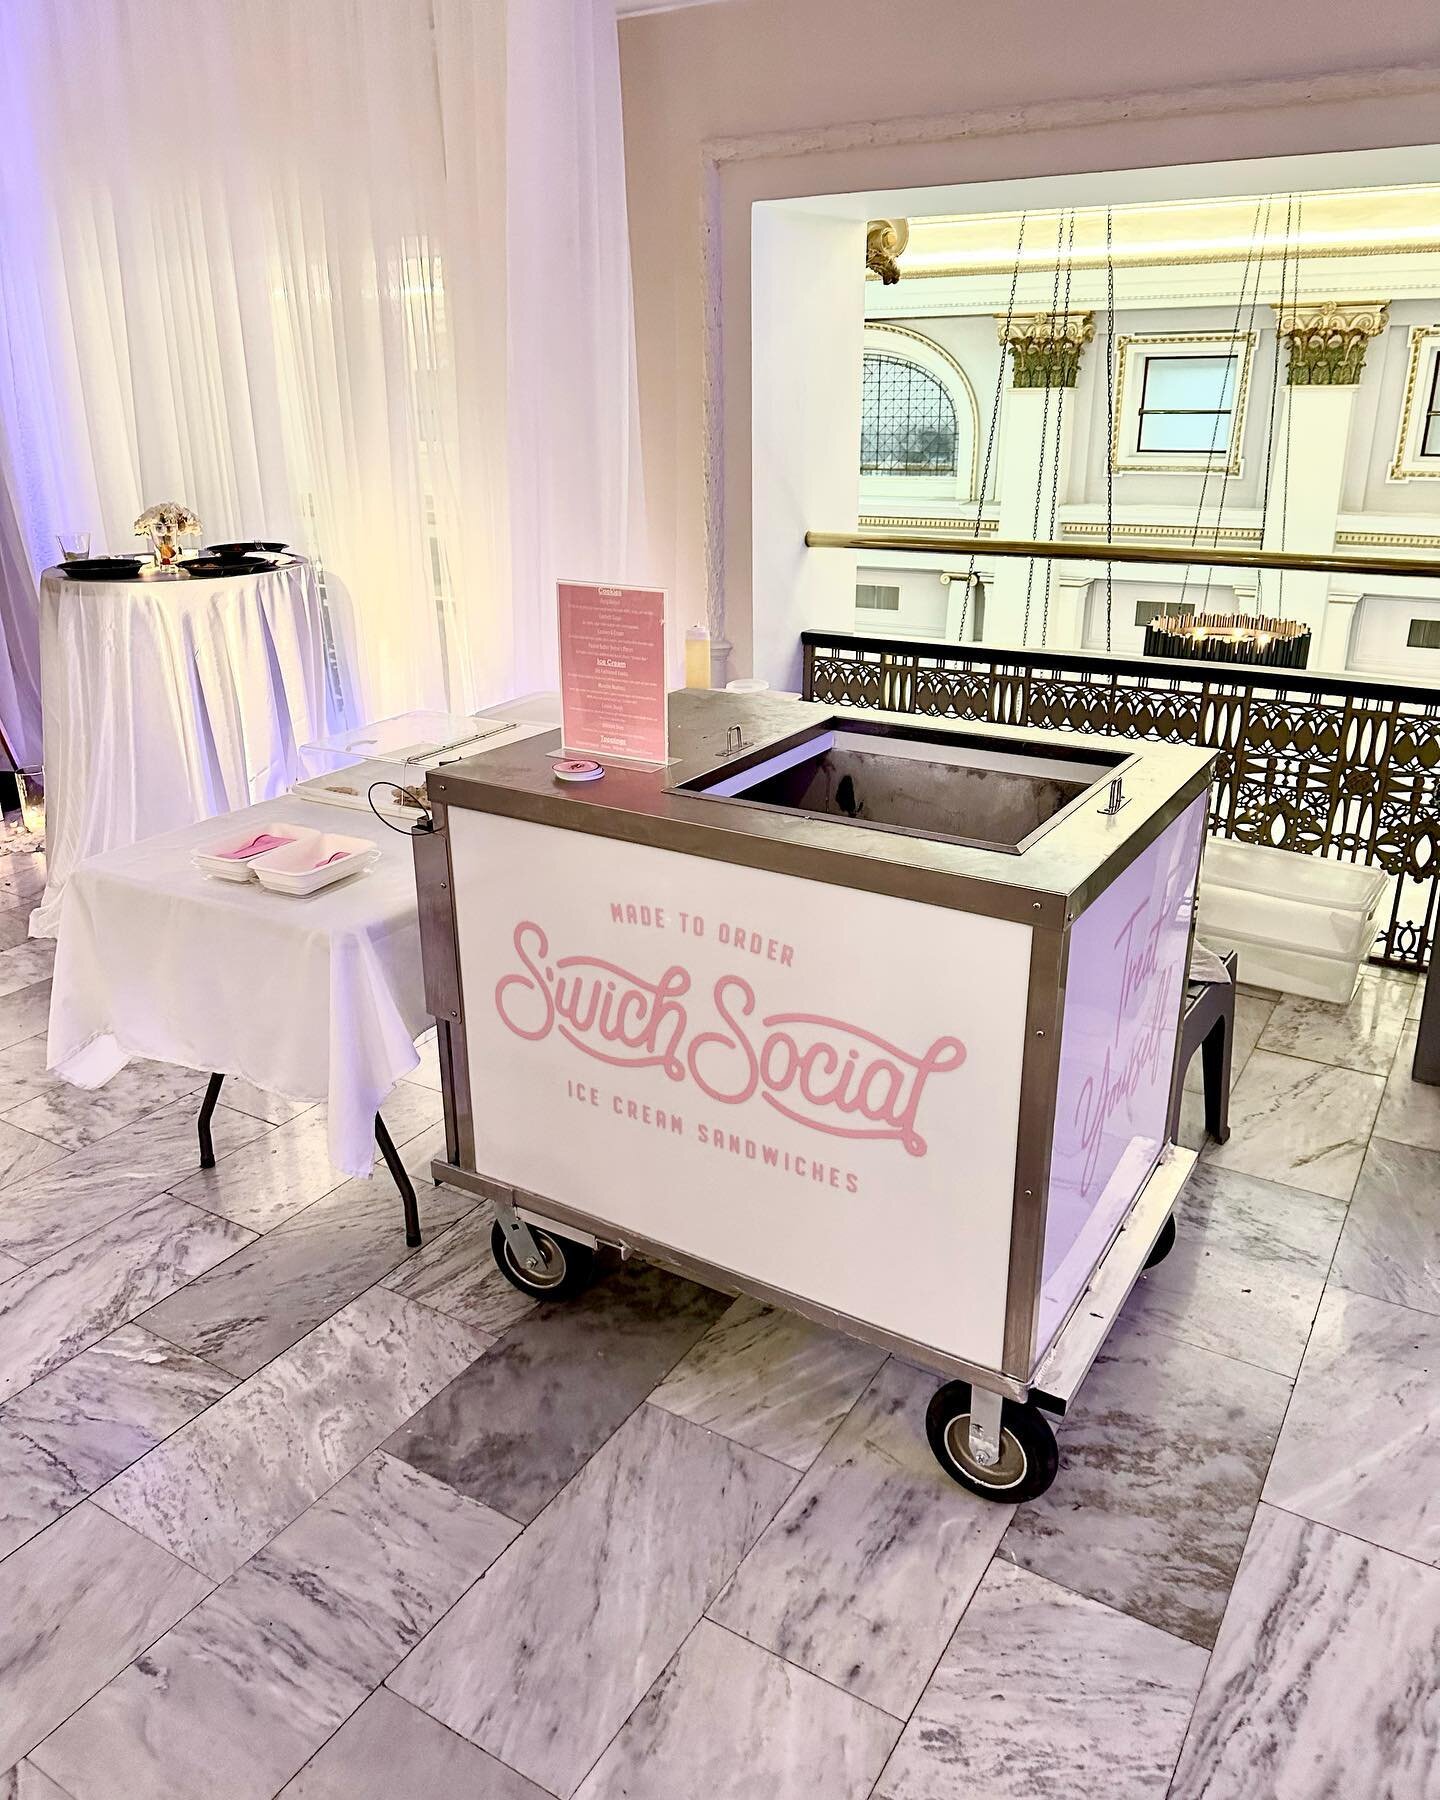 Rent our ice cream cart! 

Popular for weddings, graduation parties, corporate events- Our summer catering calendar is filling up fast. All information can be found at our website www.swichsocial.com/catering. 

📸 We loved the aesthetic from our mos